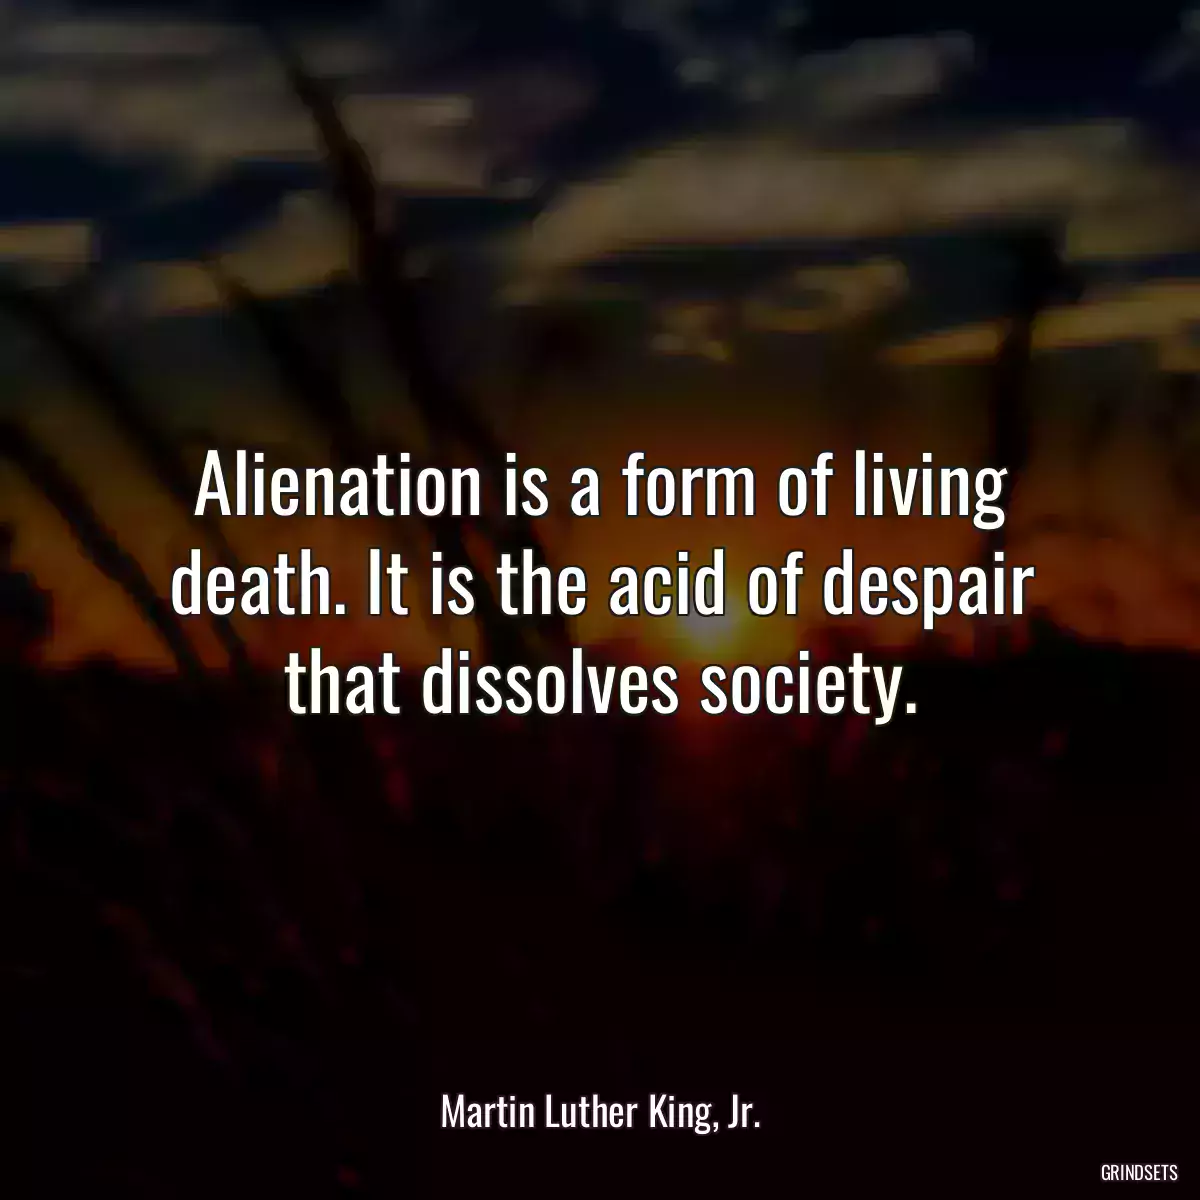 Alienation is a form of living death. It is the acid of despair that dissolves society.